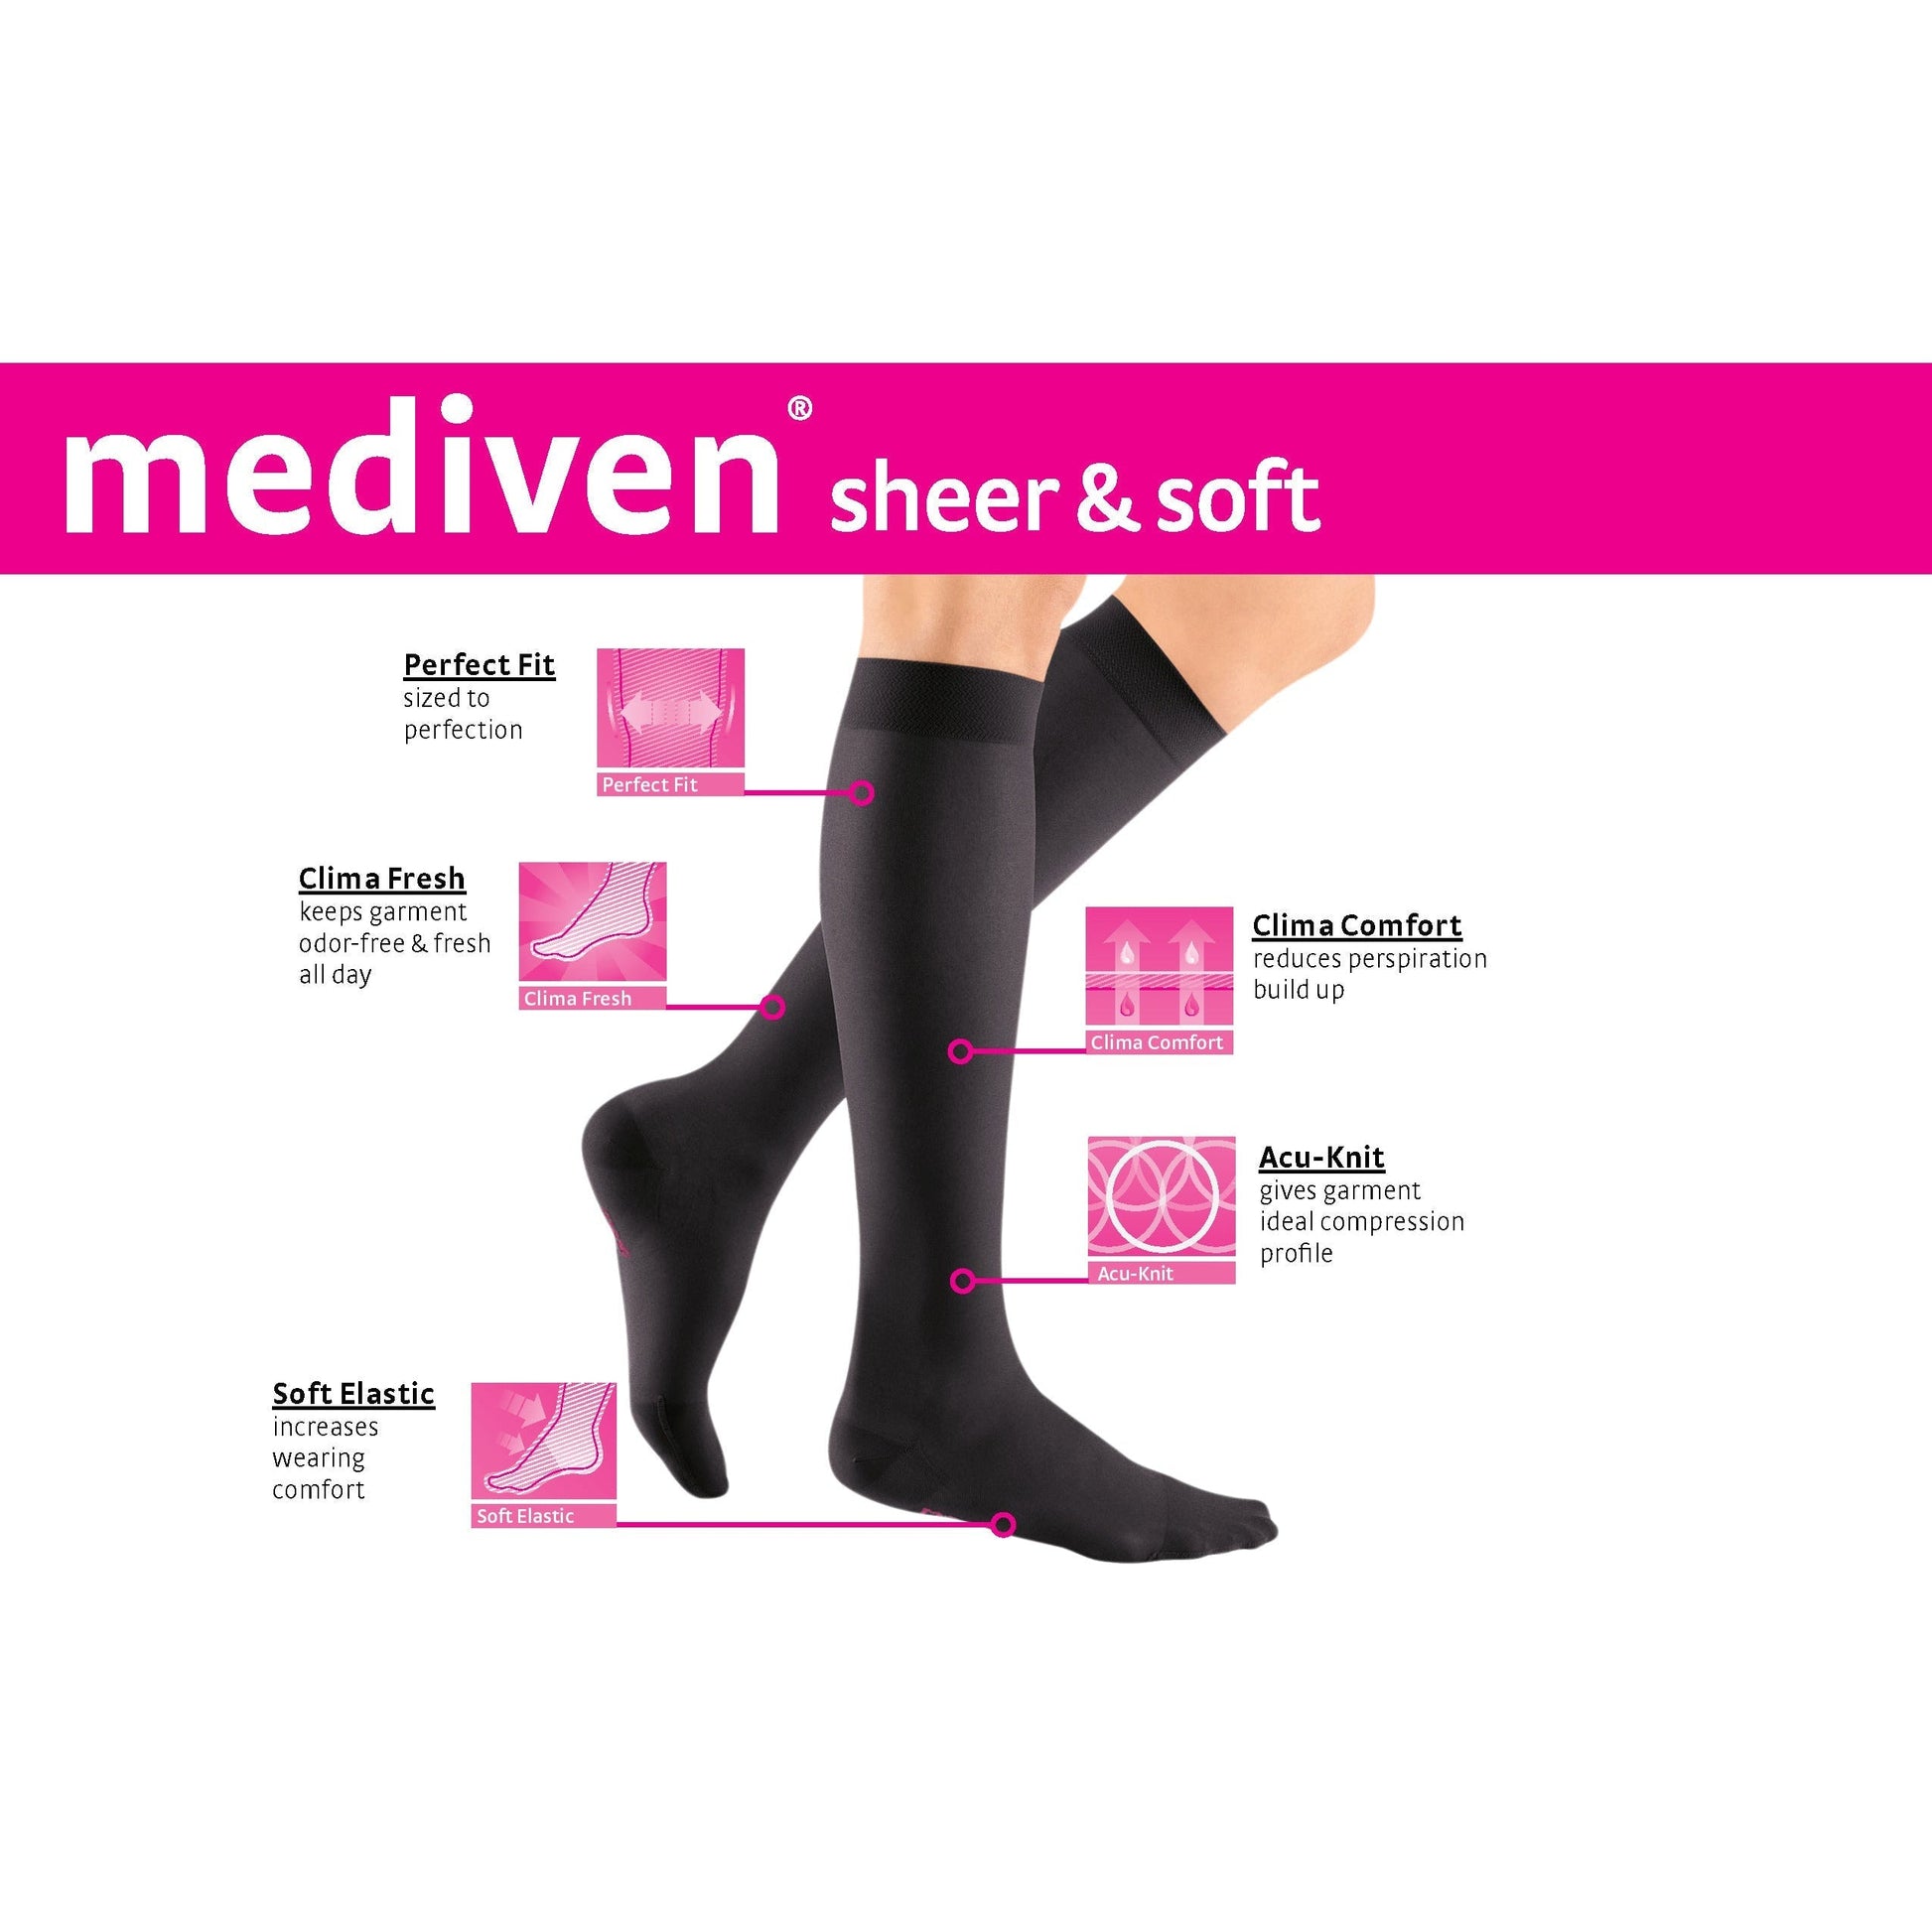 FREE NEXT-DAY Lycra® Compression Knee-High Support Socks Tights Stockings  Flight